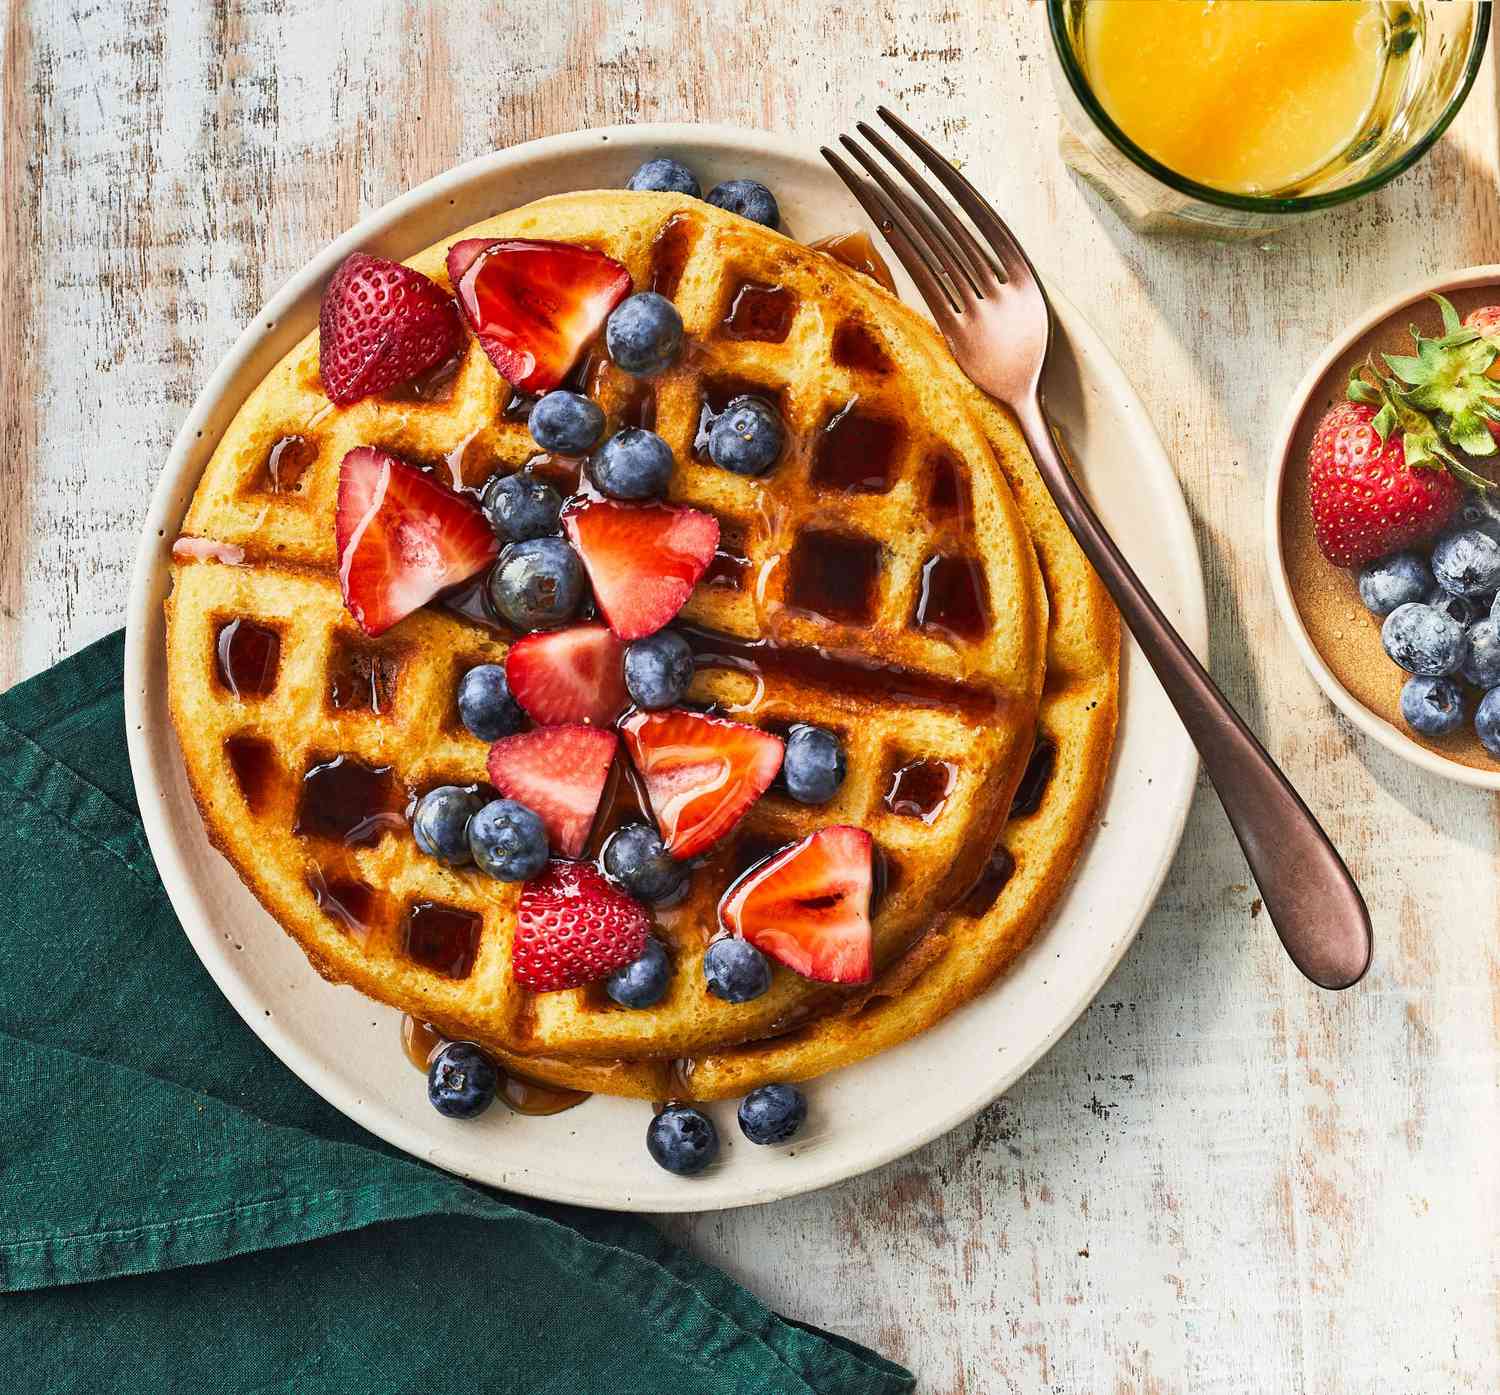 Picture of waffles with strawberries and blueberries on top.